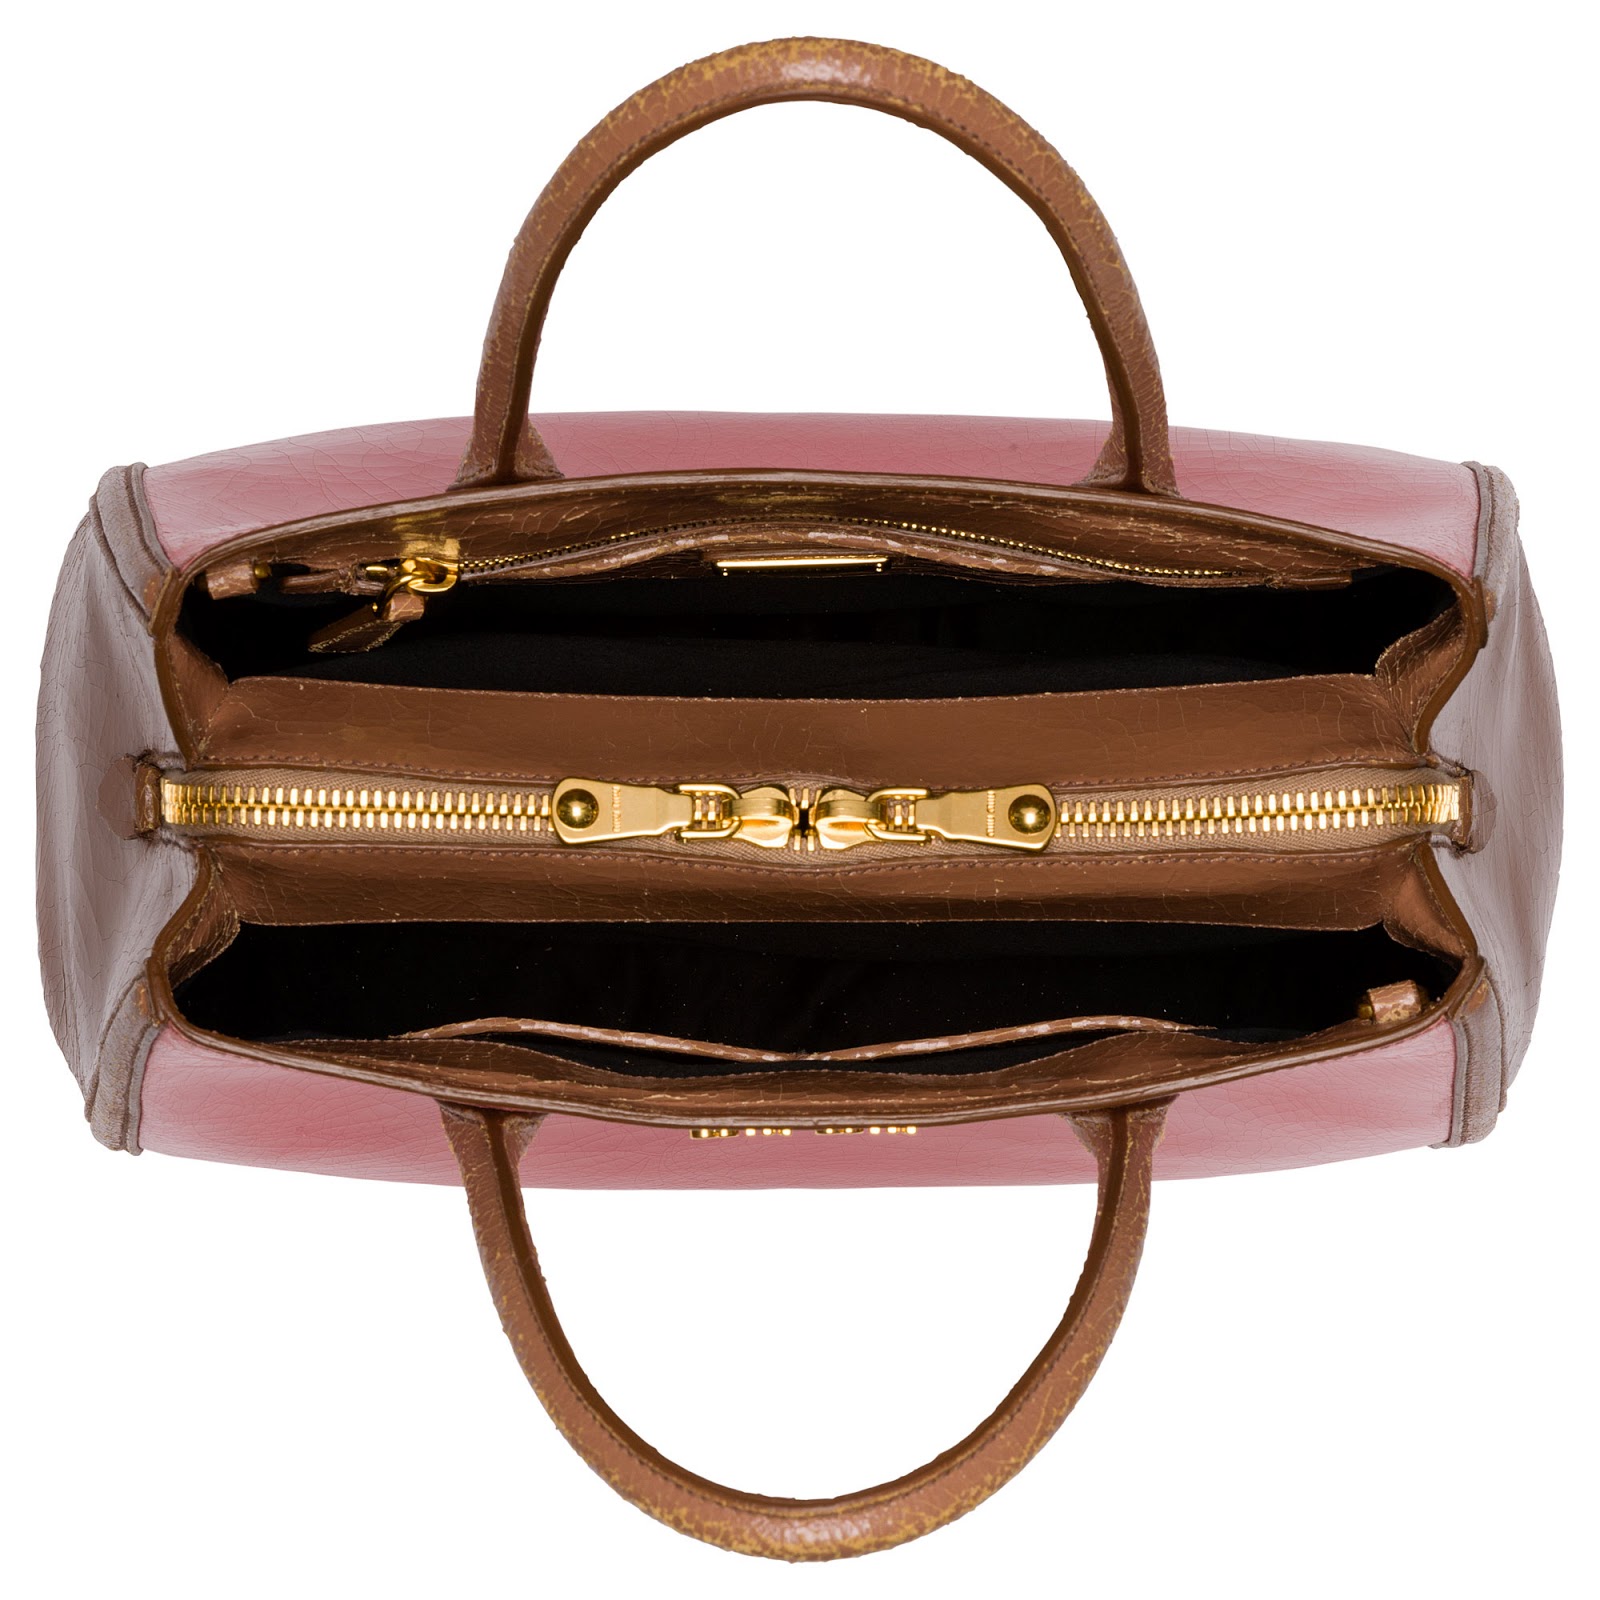 Neo LUXuries: MIU MIU Two-Toned Suede Calf Leather Top Handle Tote ...